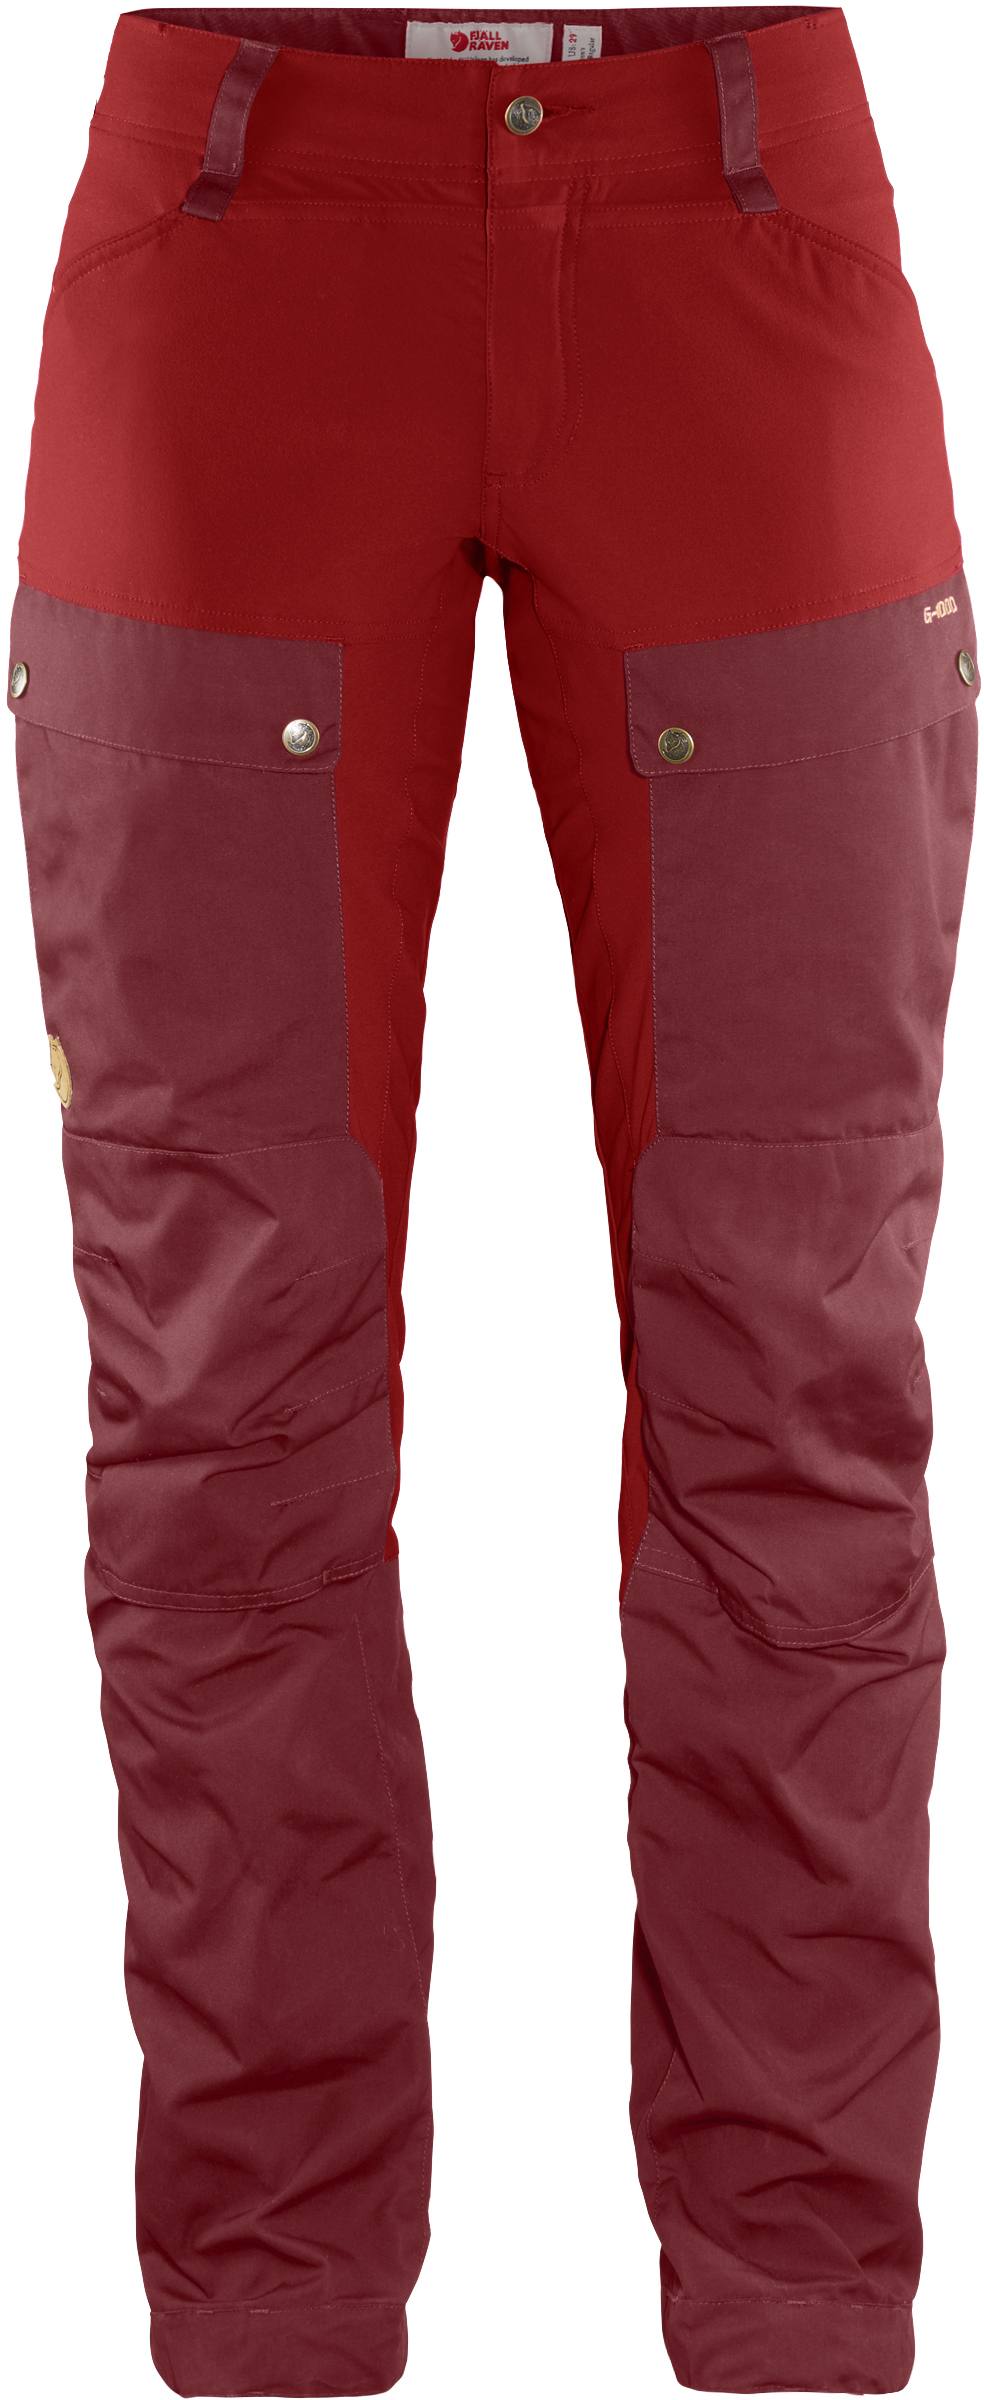 Keb Trousers Curved Women’s Ox Red / Lava 34